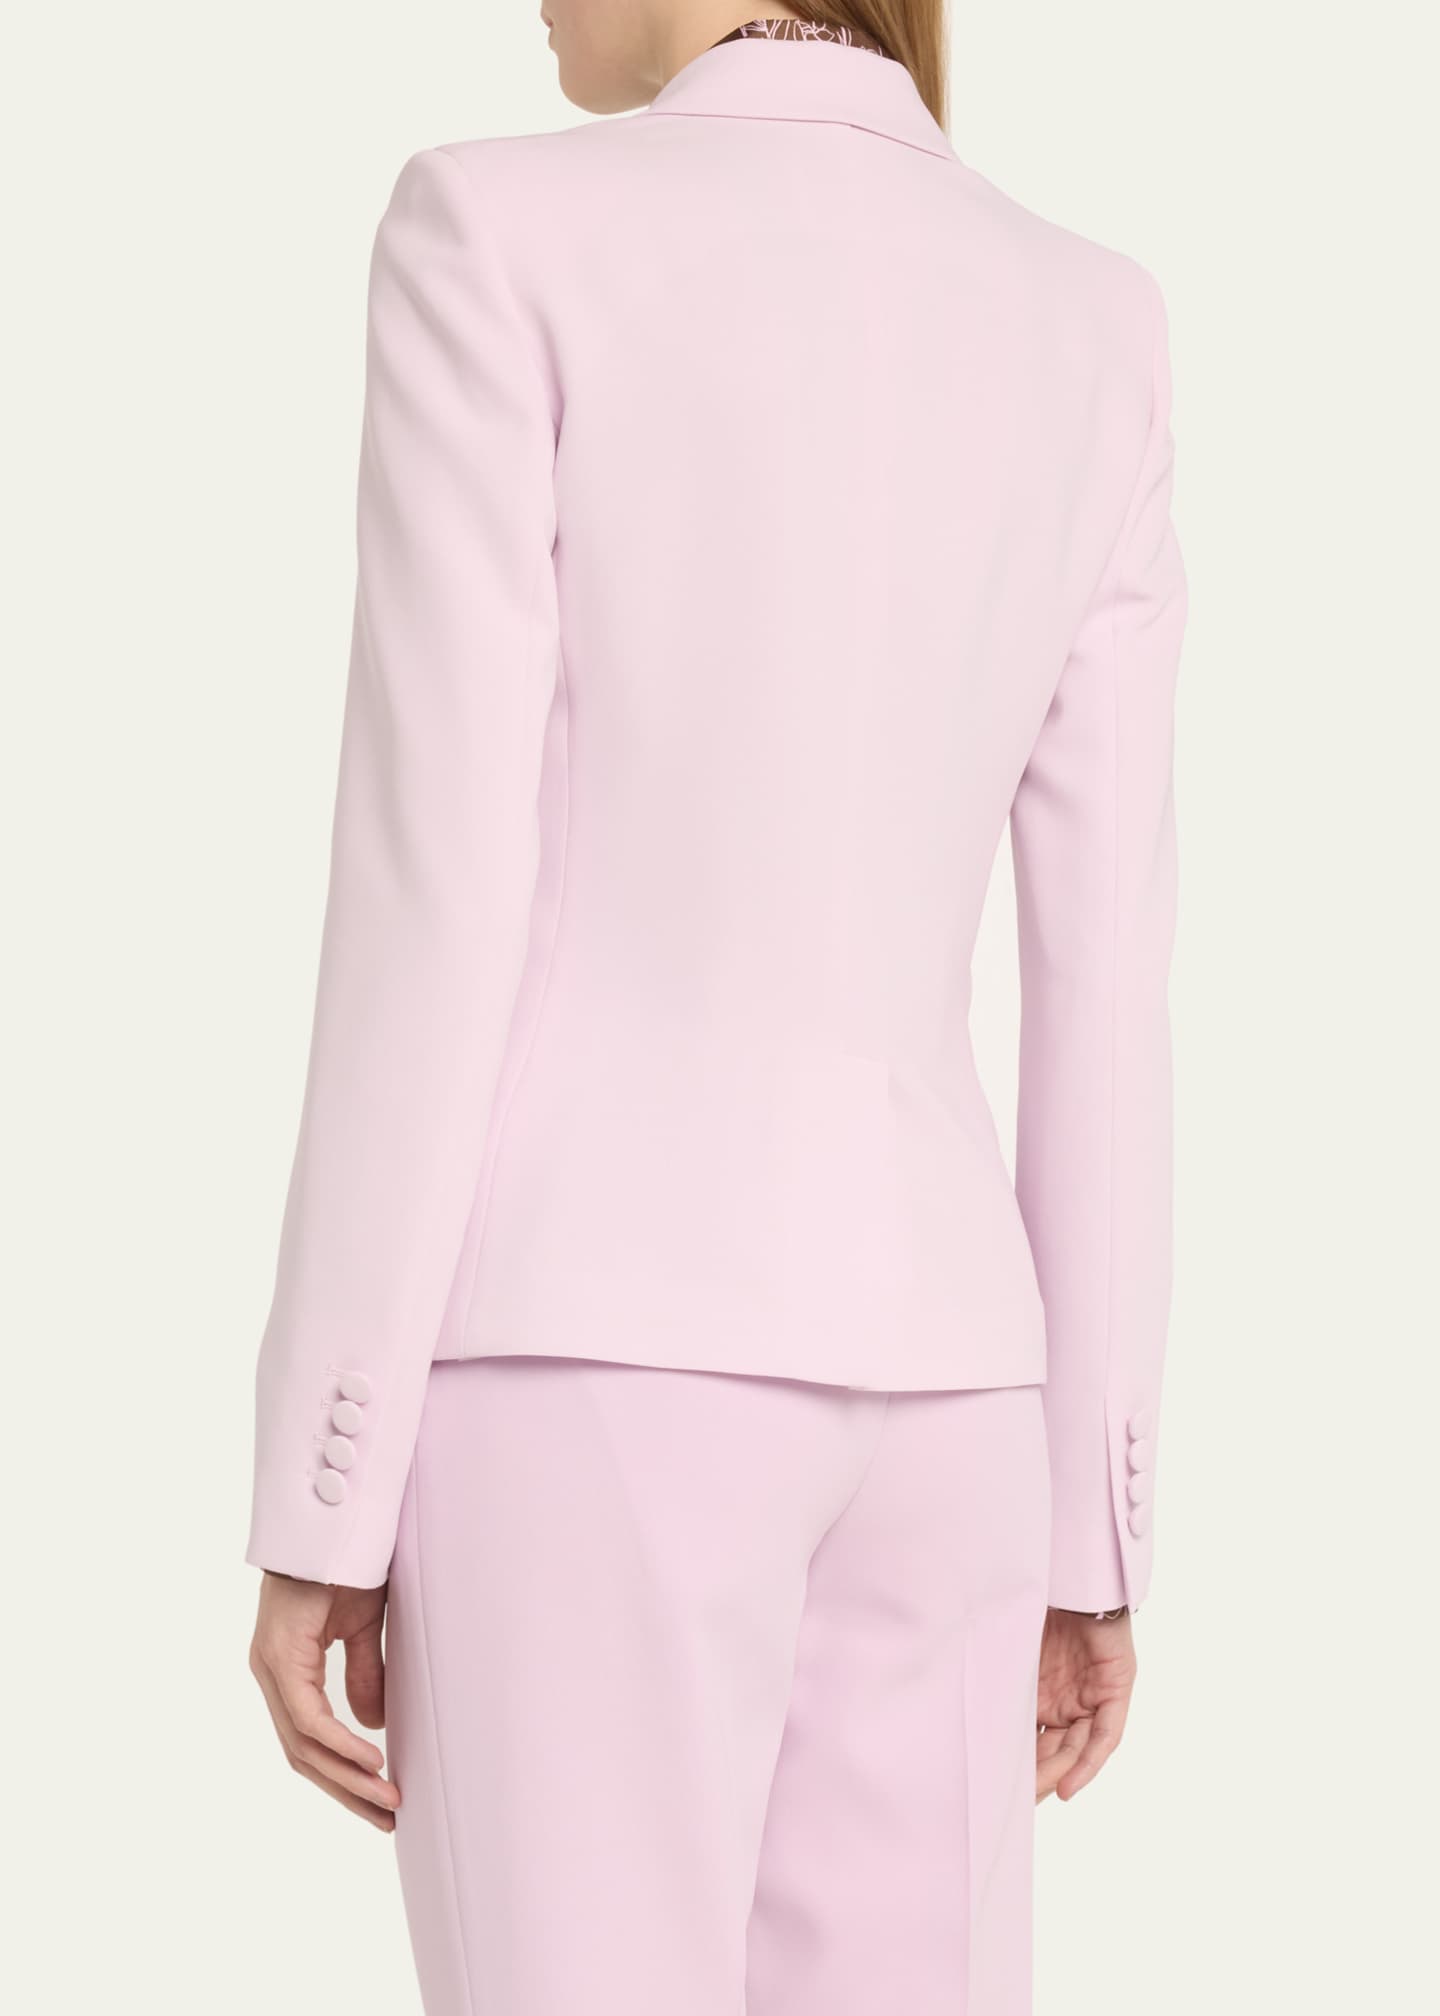 Lafayette 148 New York No Button Pant Suits for Women